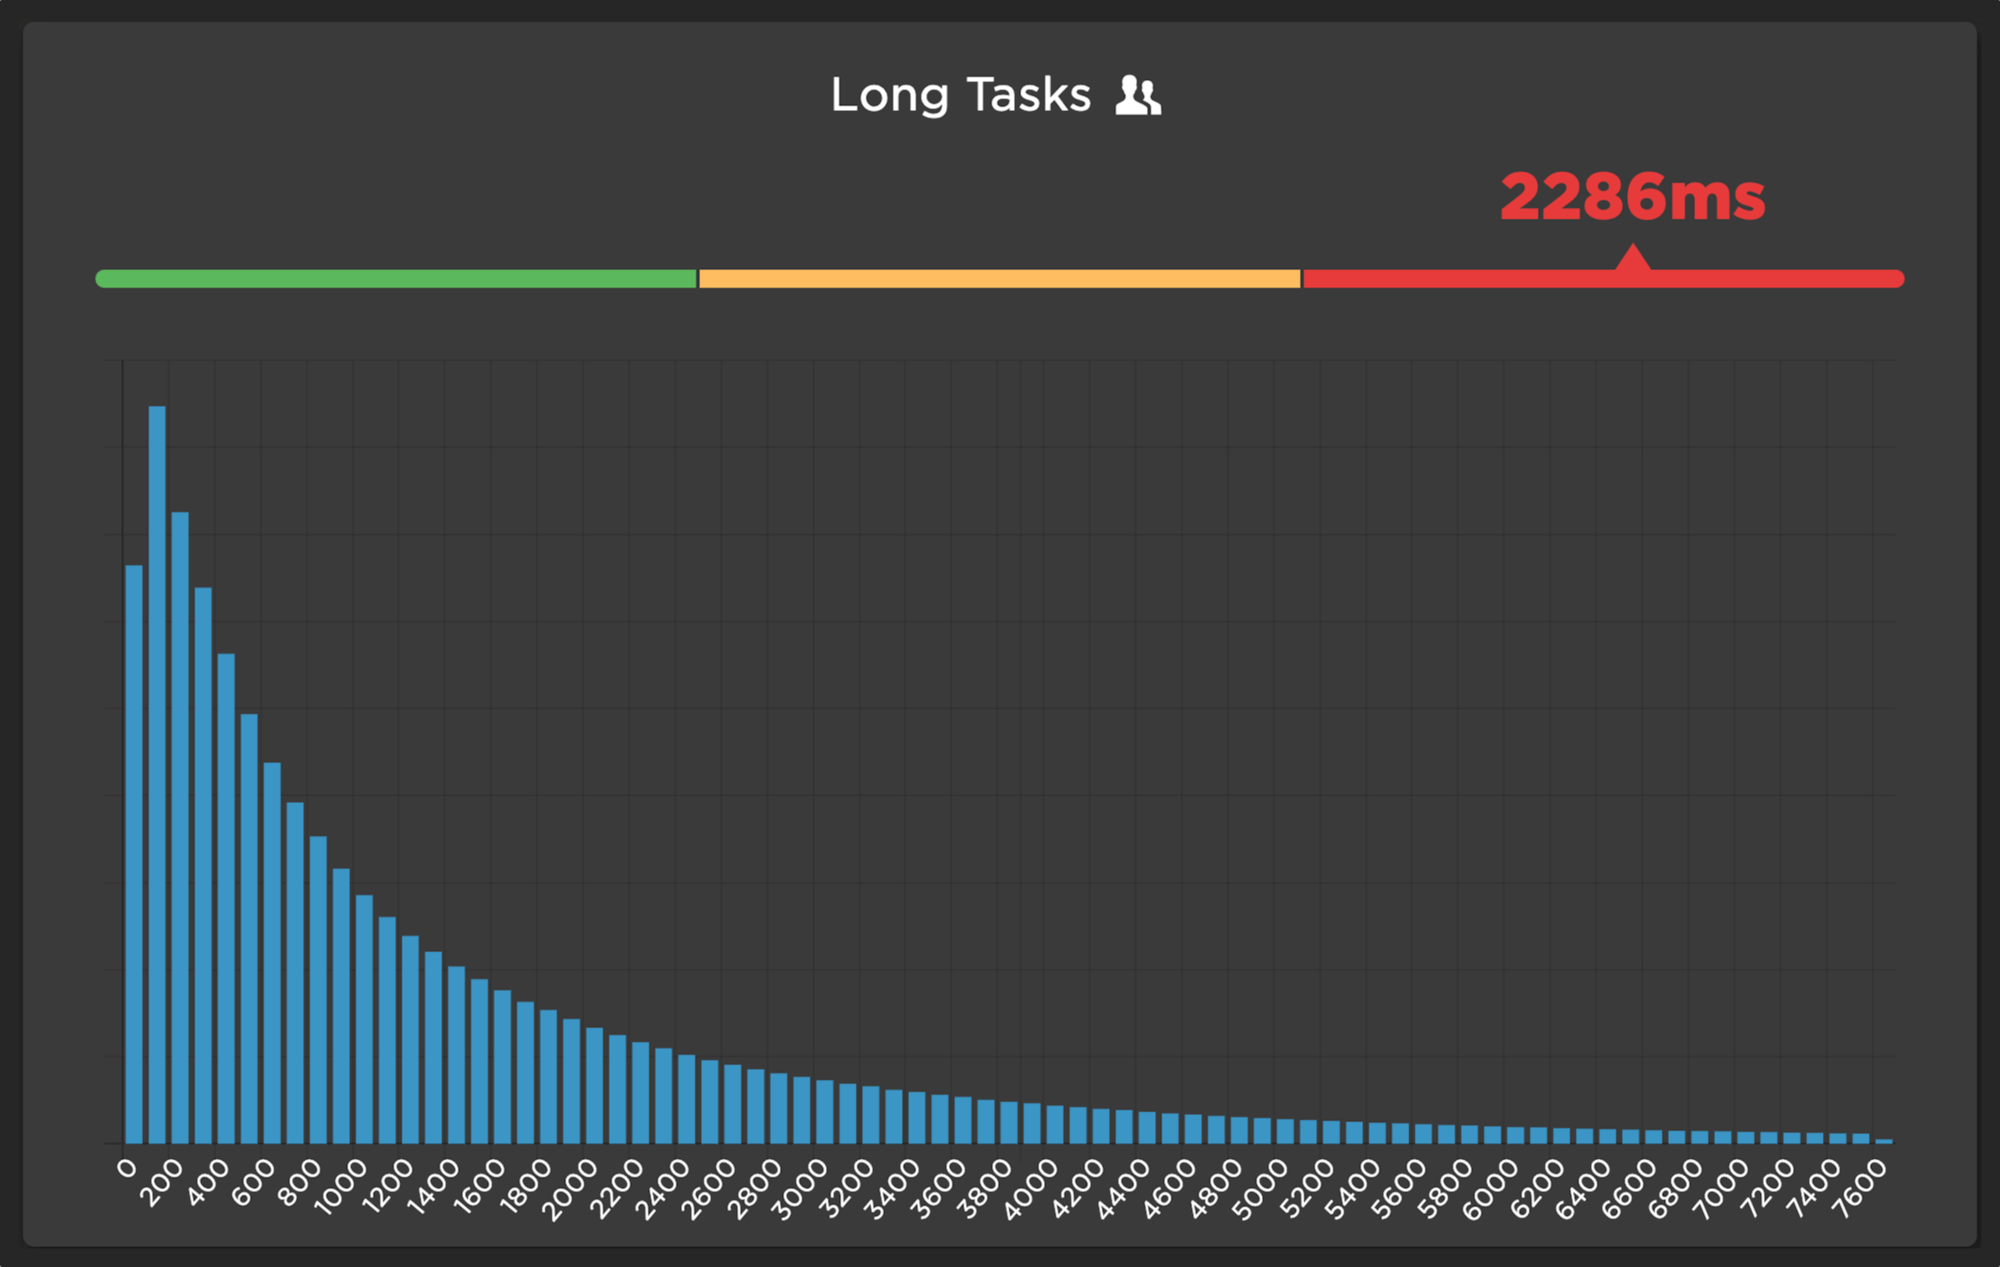 Distribution showing time spent on long tasks from SpeedCurve RUM